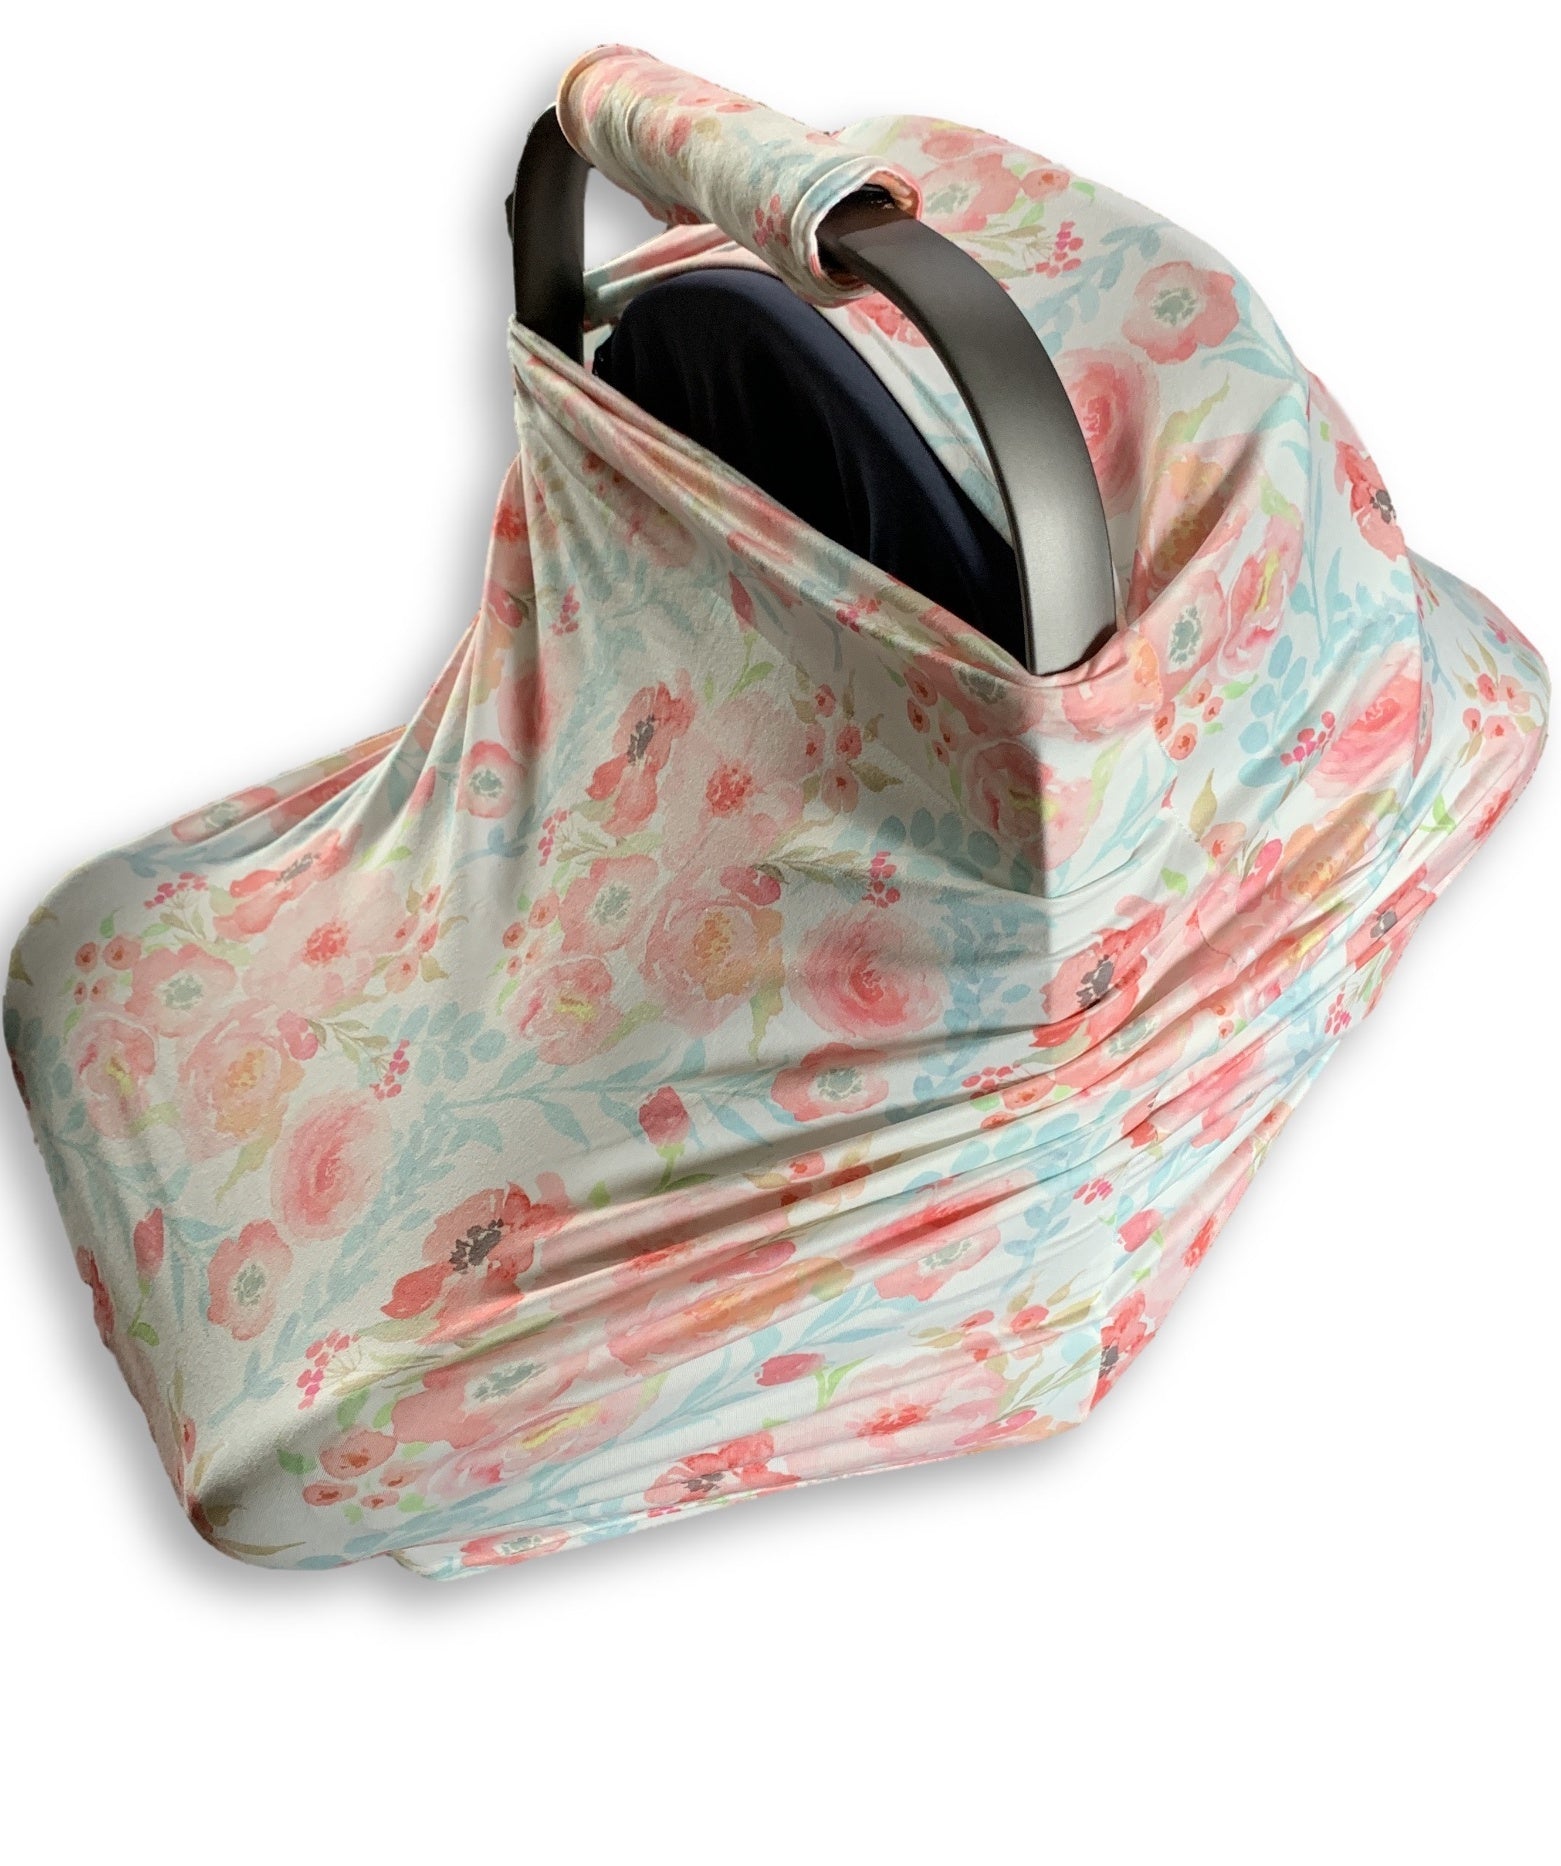 Bloom Car Seat Cover